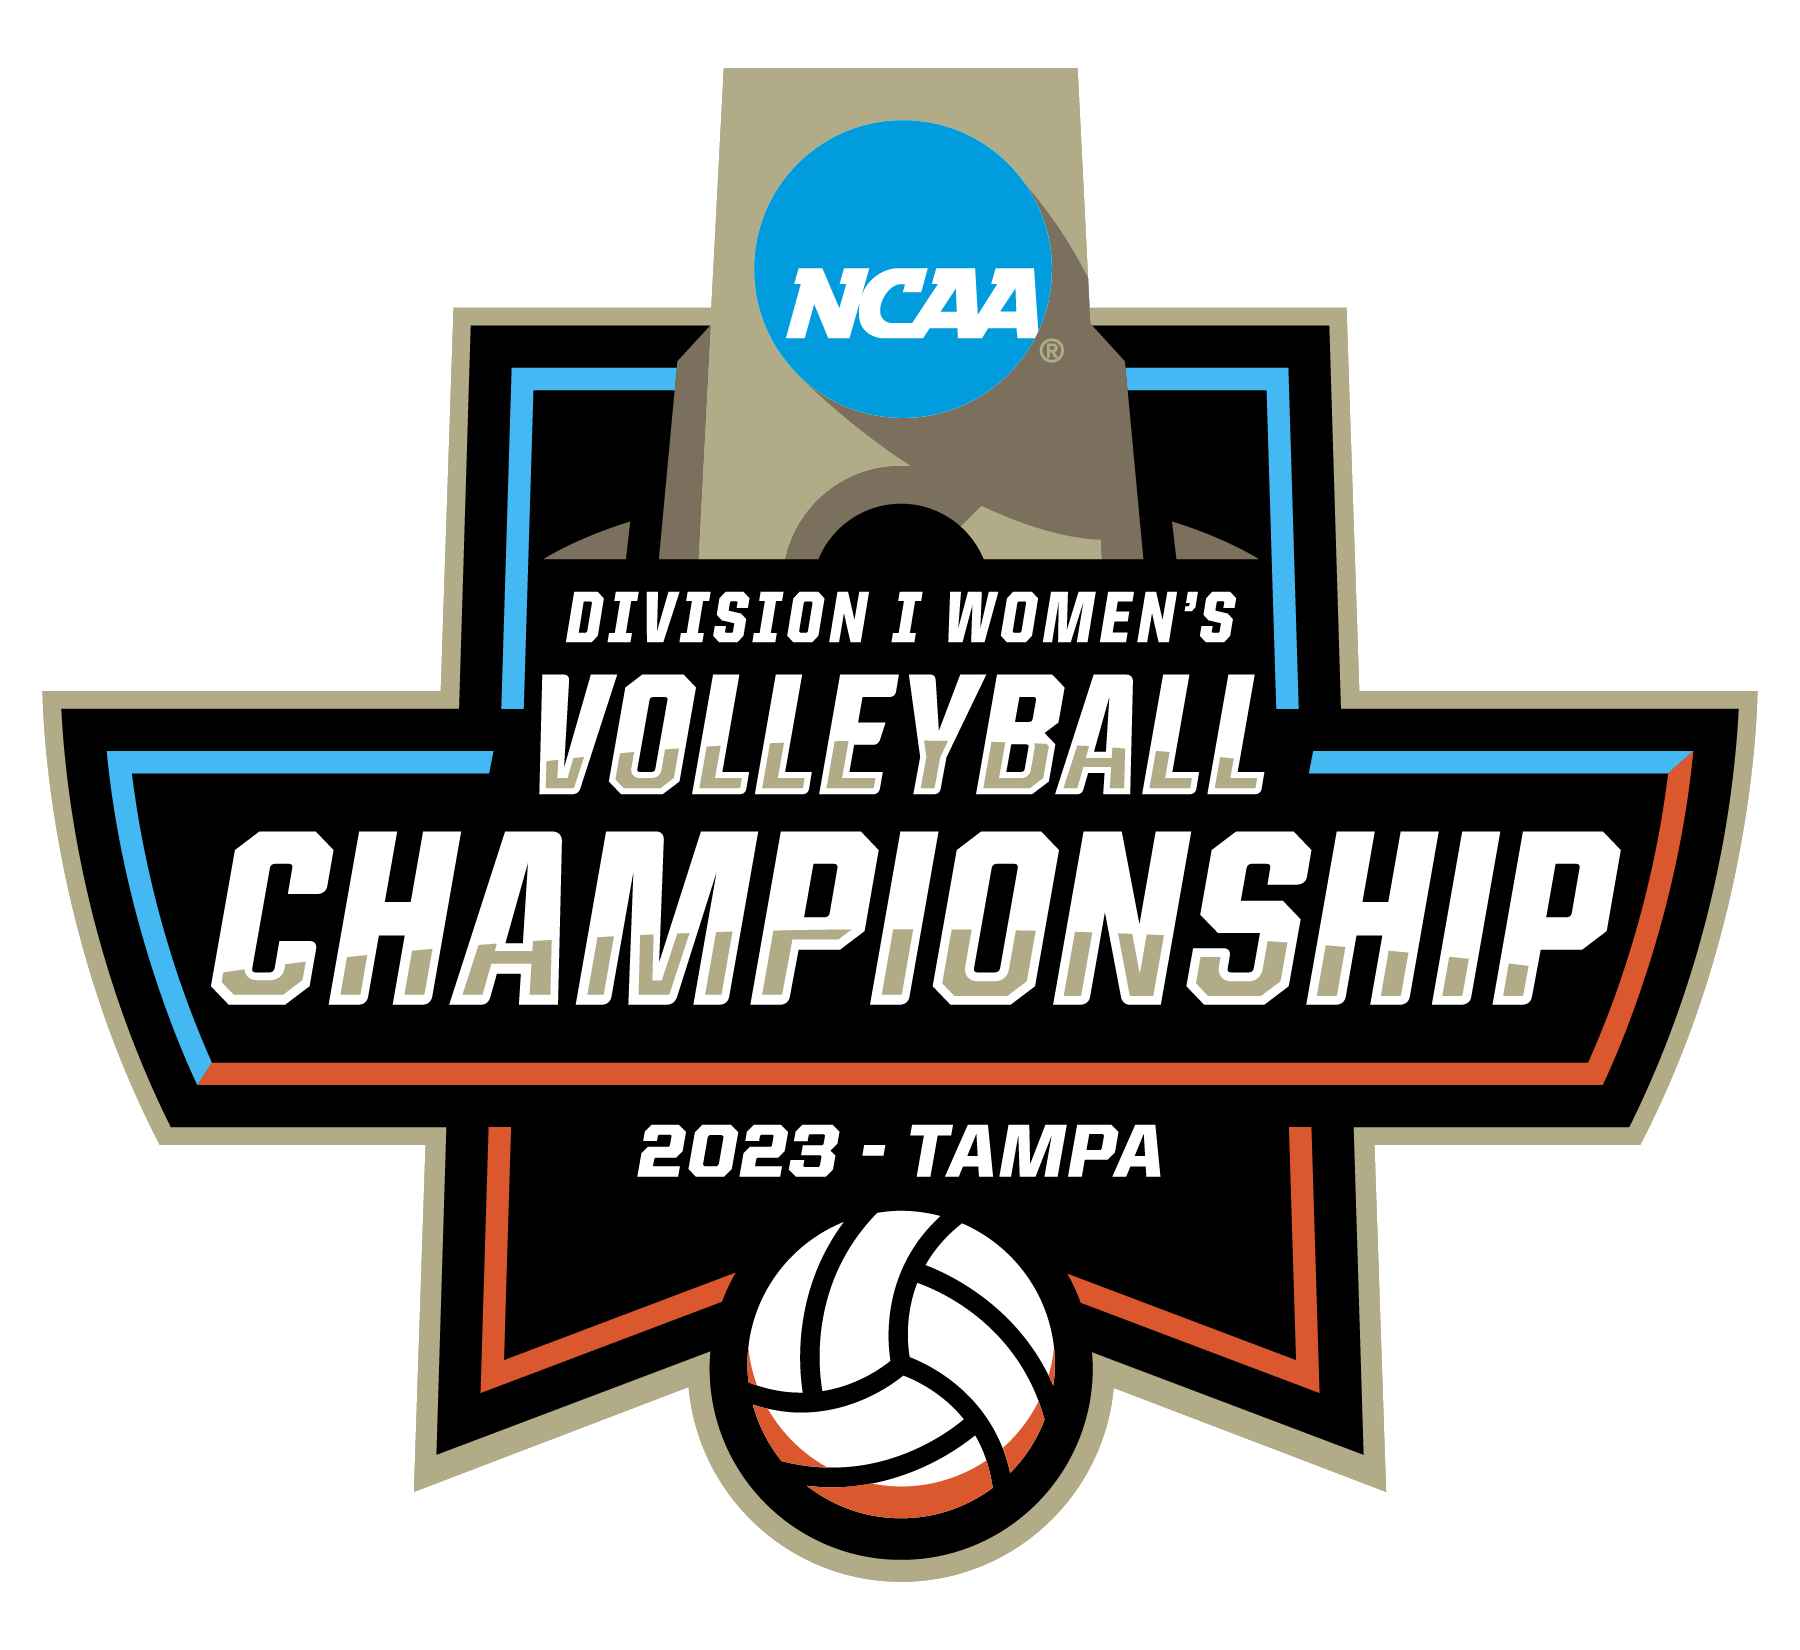 Division I Women’s Volleyball Championship